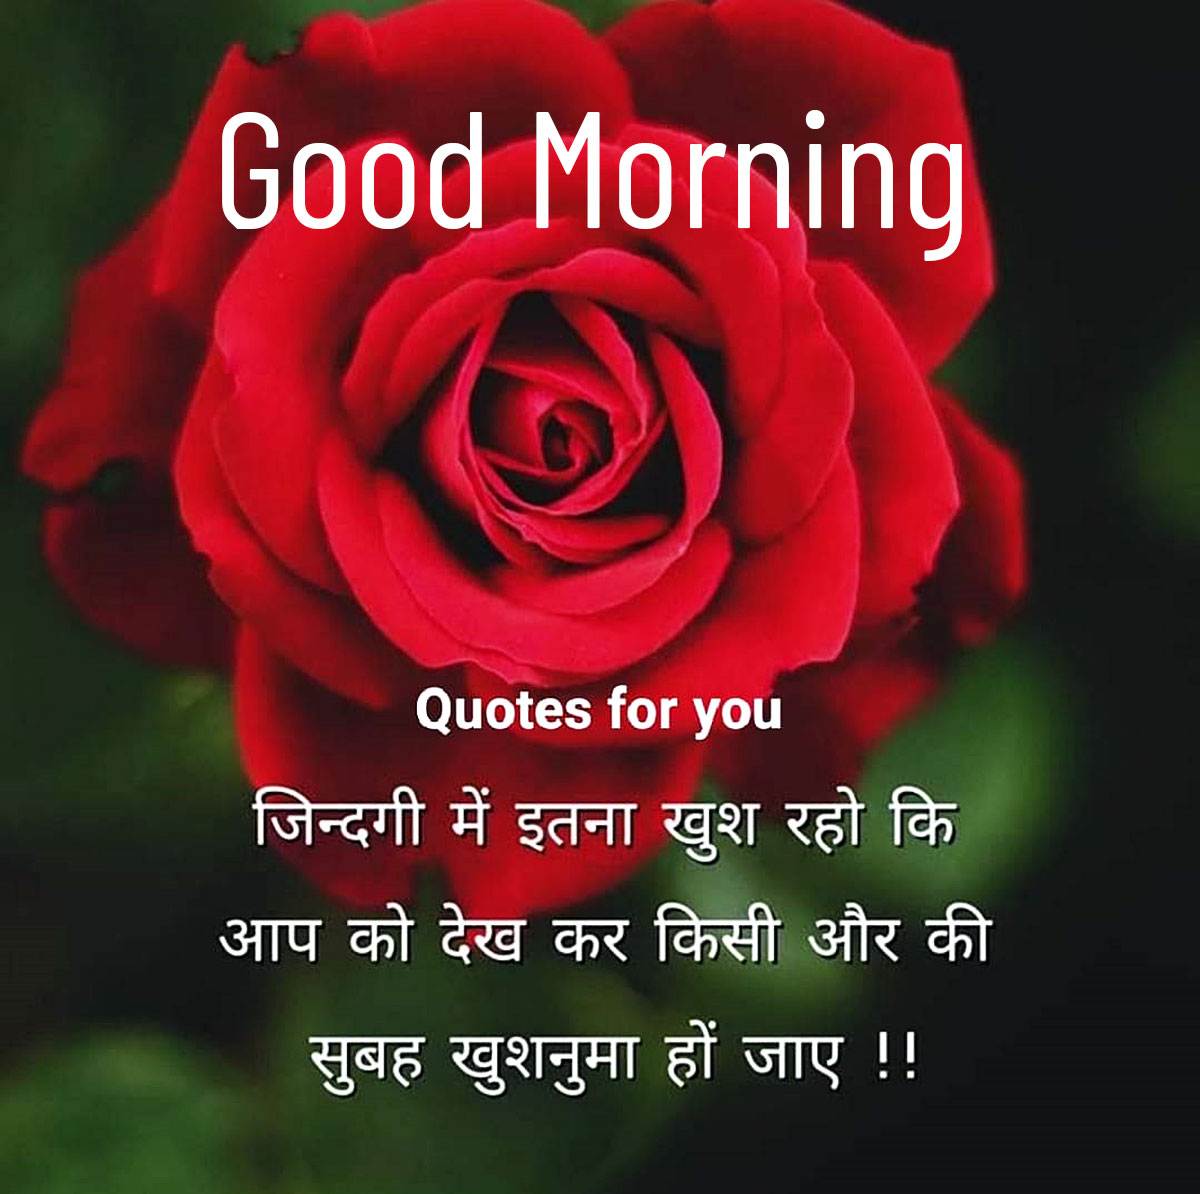 Good Morning Images with red rose and life quotes